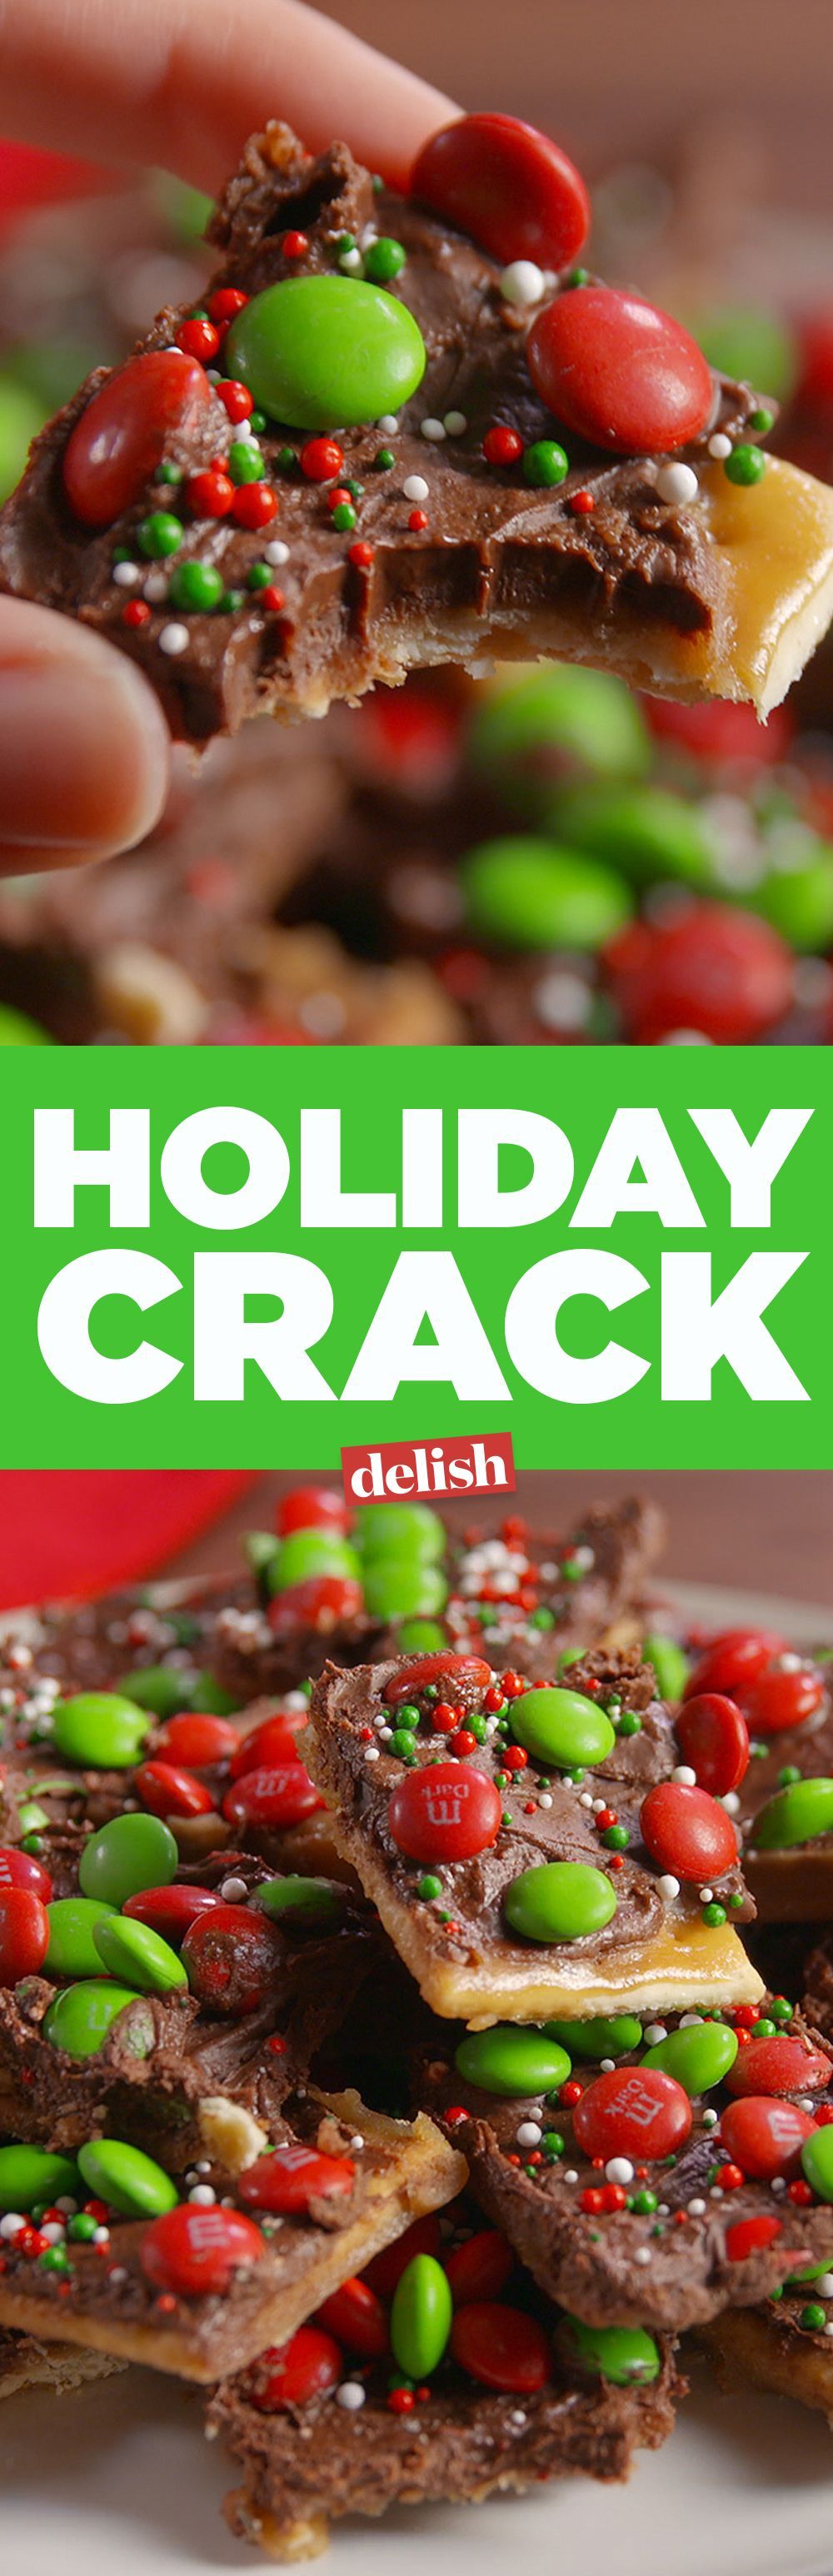 Warning: Holiday Crack will cause arguments over the last piece. Get the recipe fr